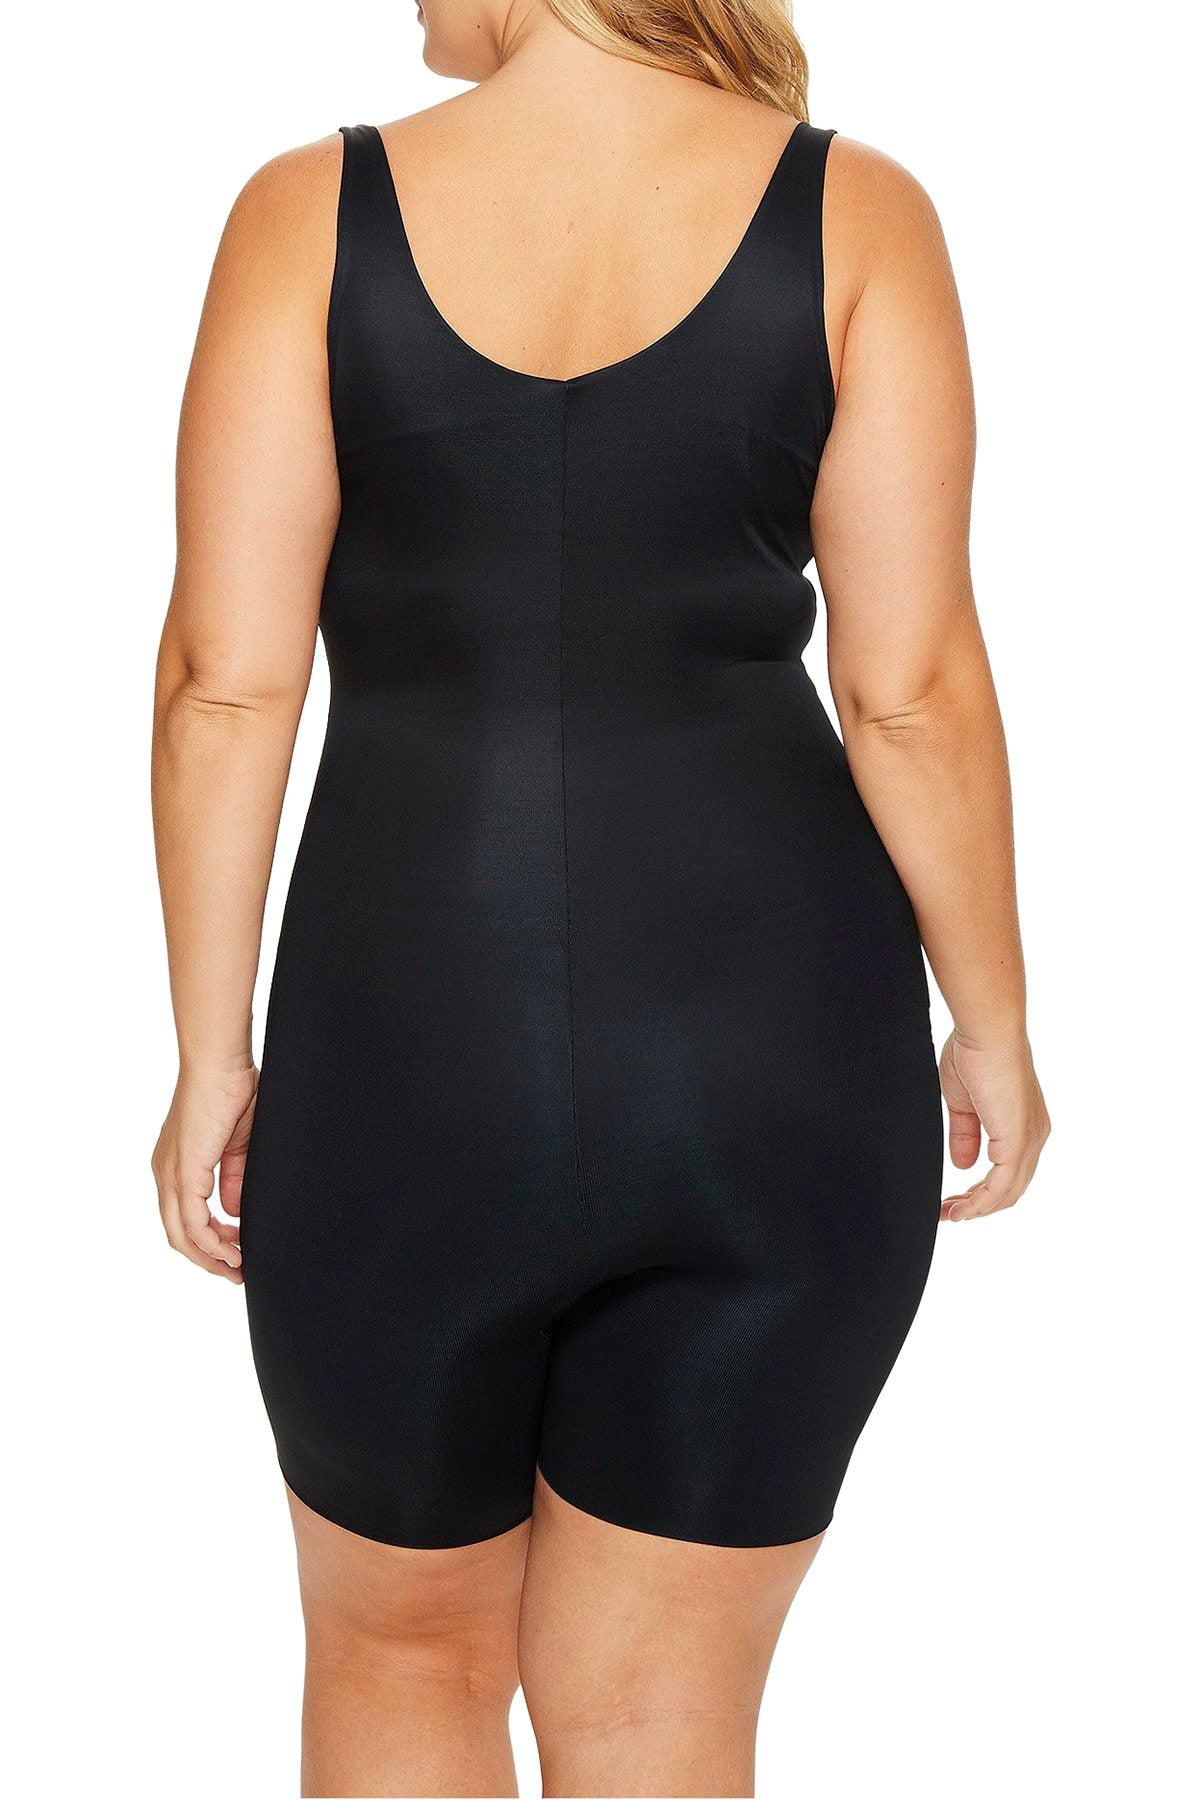 SPANX PLUS Black Power Conceal-Her Open-Bust Mid-Thigh Bodysuit ...